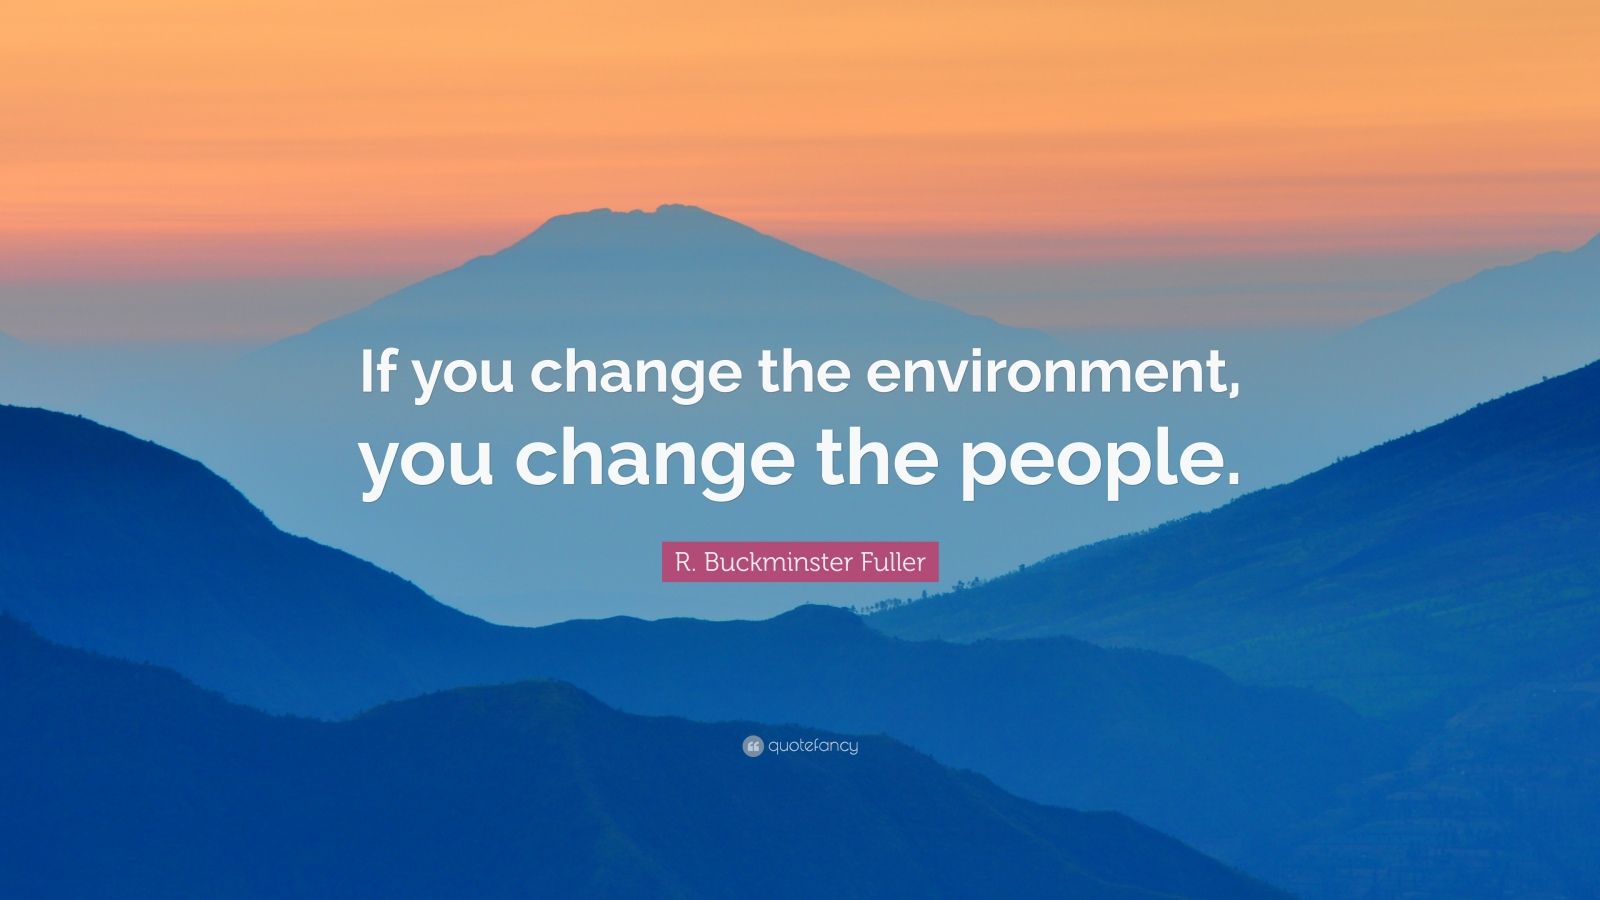 1753408 R Buckminster Fuller Quote If you change the environment you